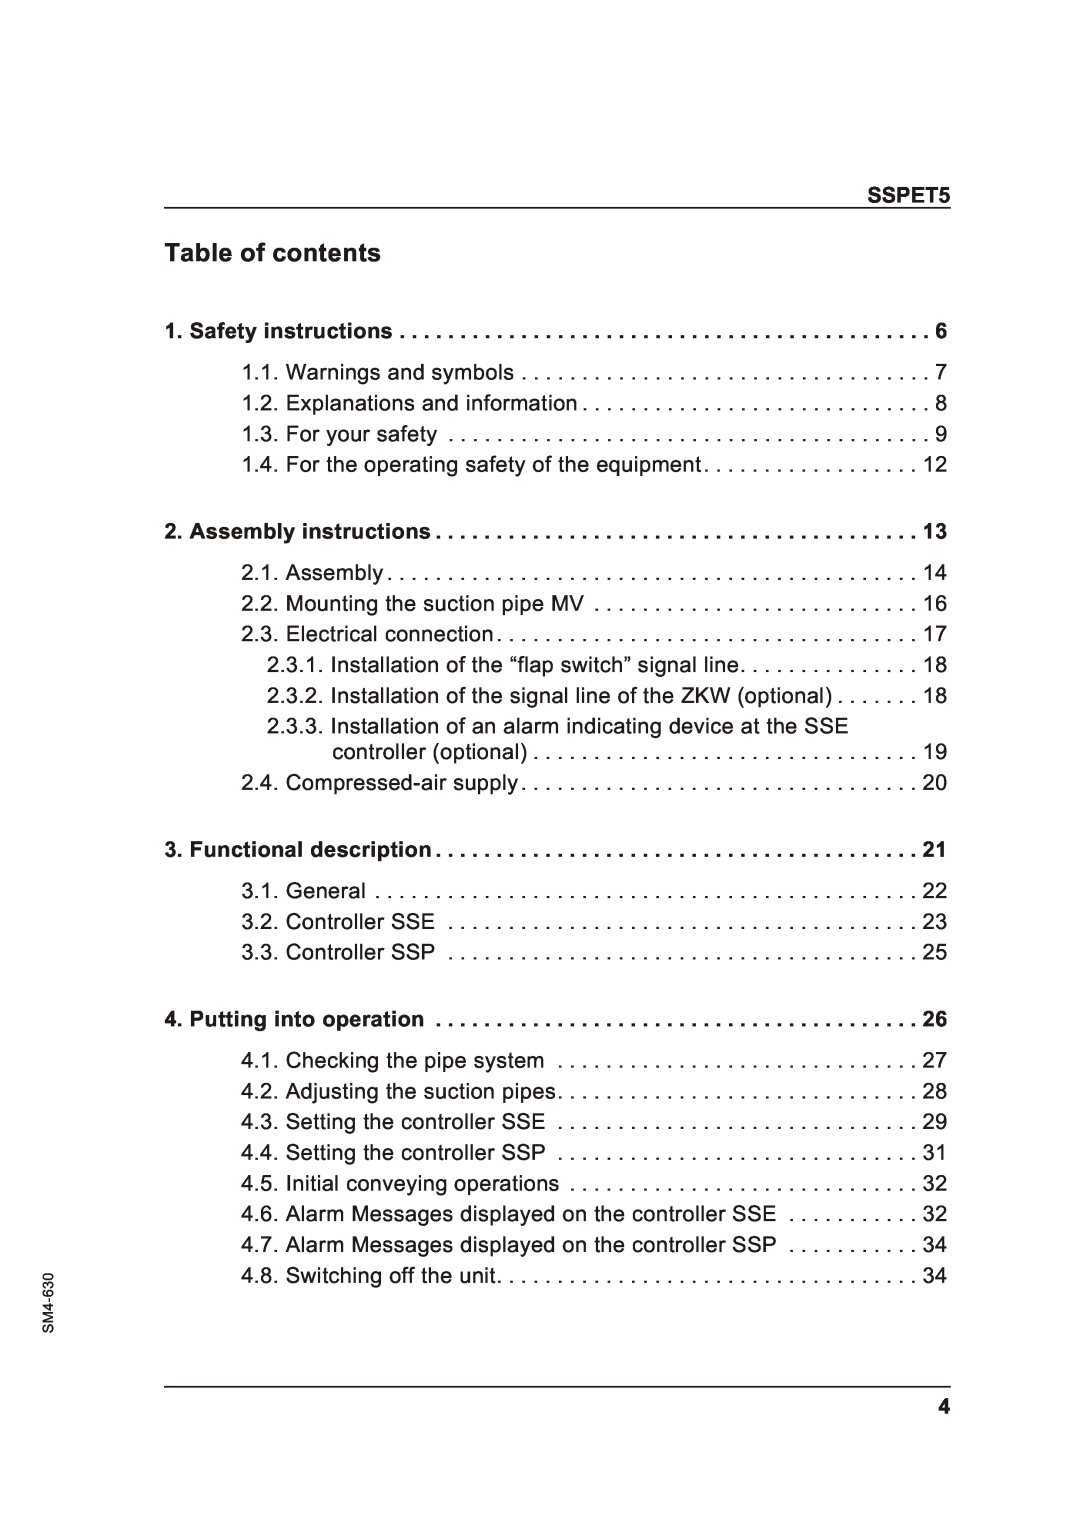 Sterling SSPET 5 Table of contents, Safety instructions, Assembly instructions, Functional description, SSPET5 